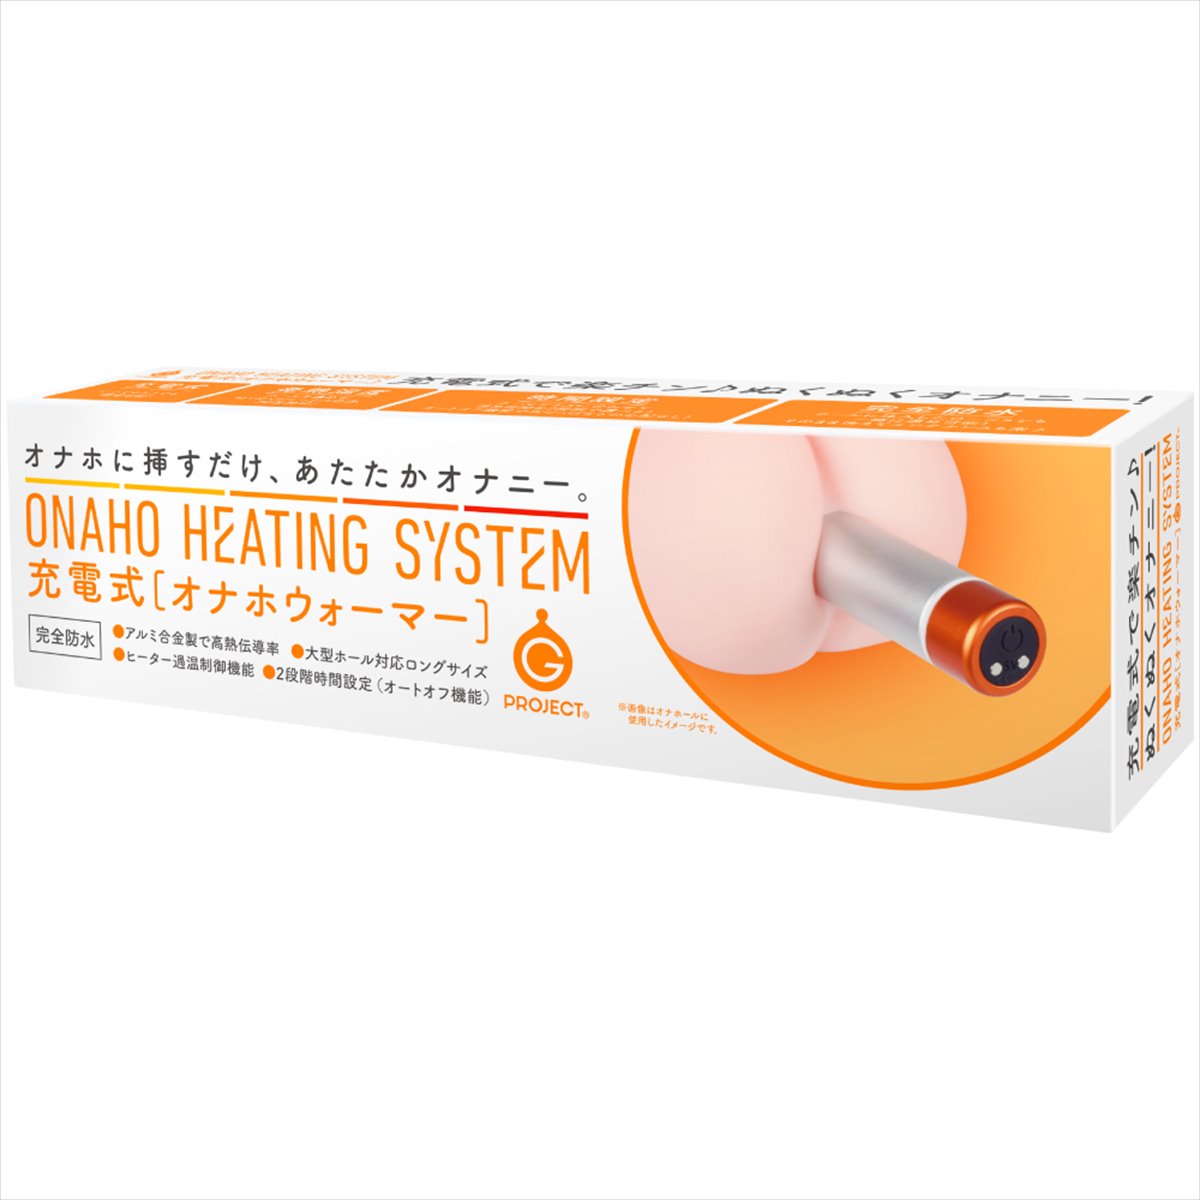 ONAHO HEATING SYSTEM [d [γϰ]